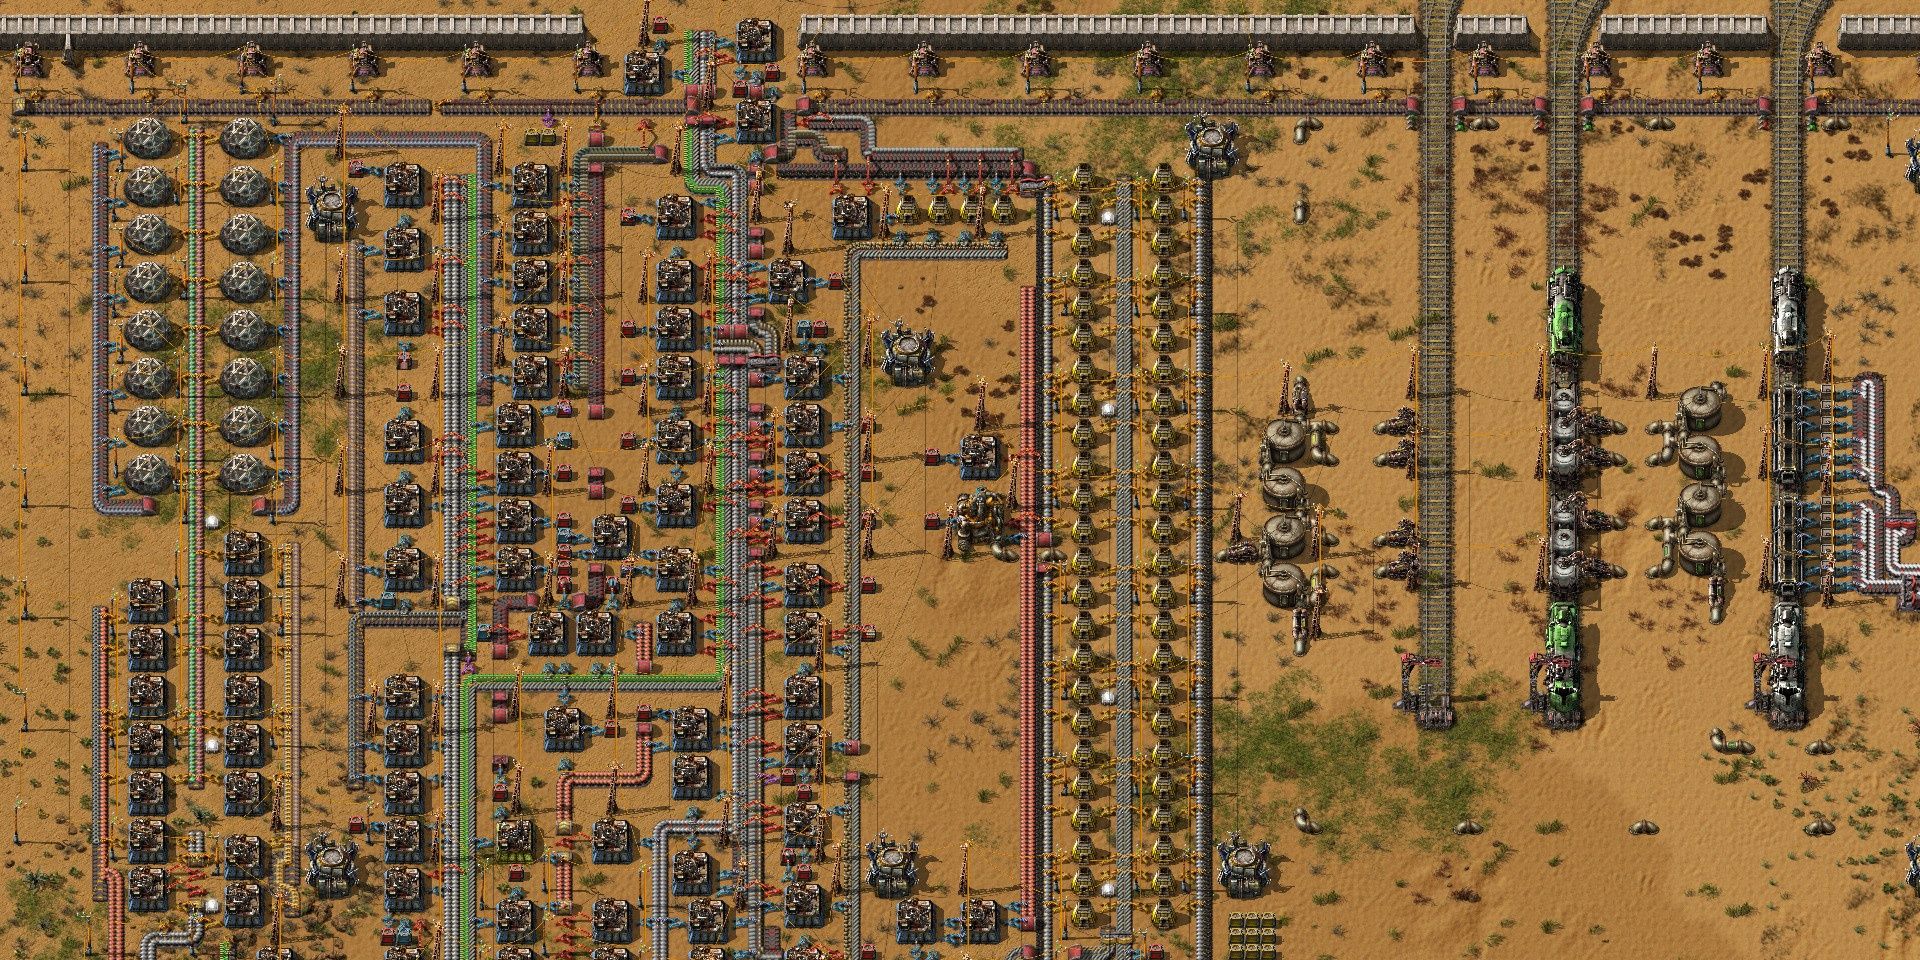 A series of assembly lines, refineries, and railroad tracks in the game Factorio